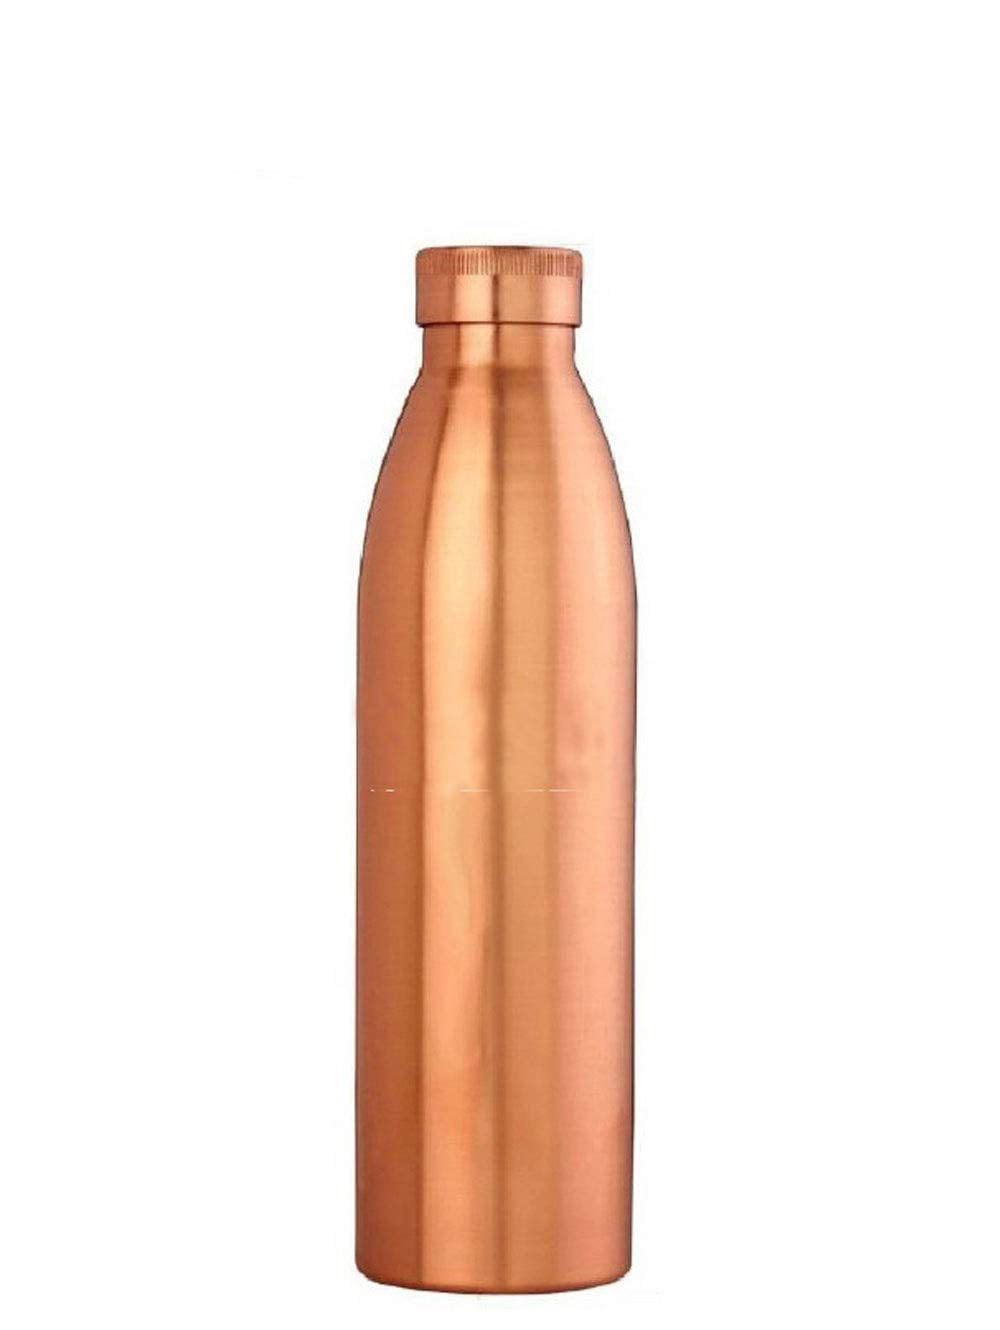 100% Pure Copper Water Bottle For Yoga Ayurveda Health Benefits 950 Ml Hammered 